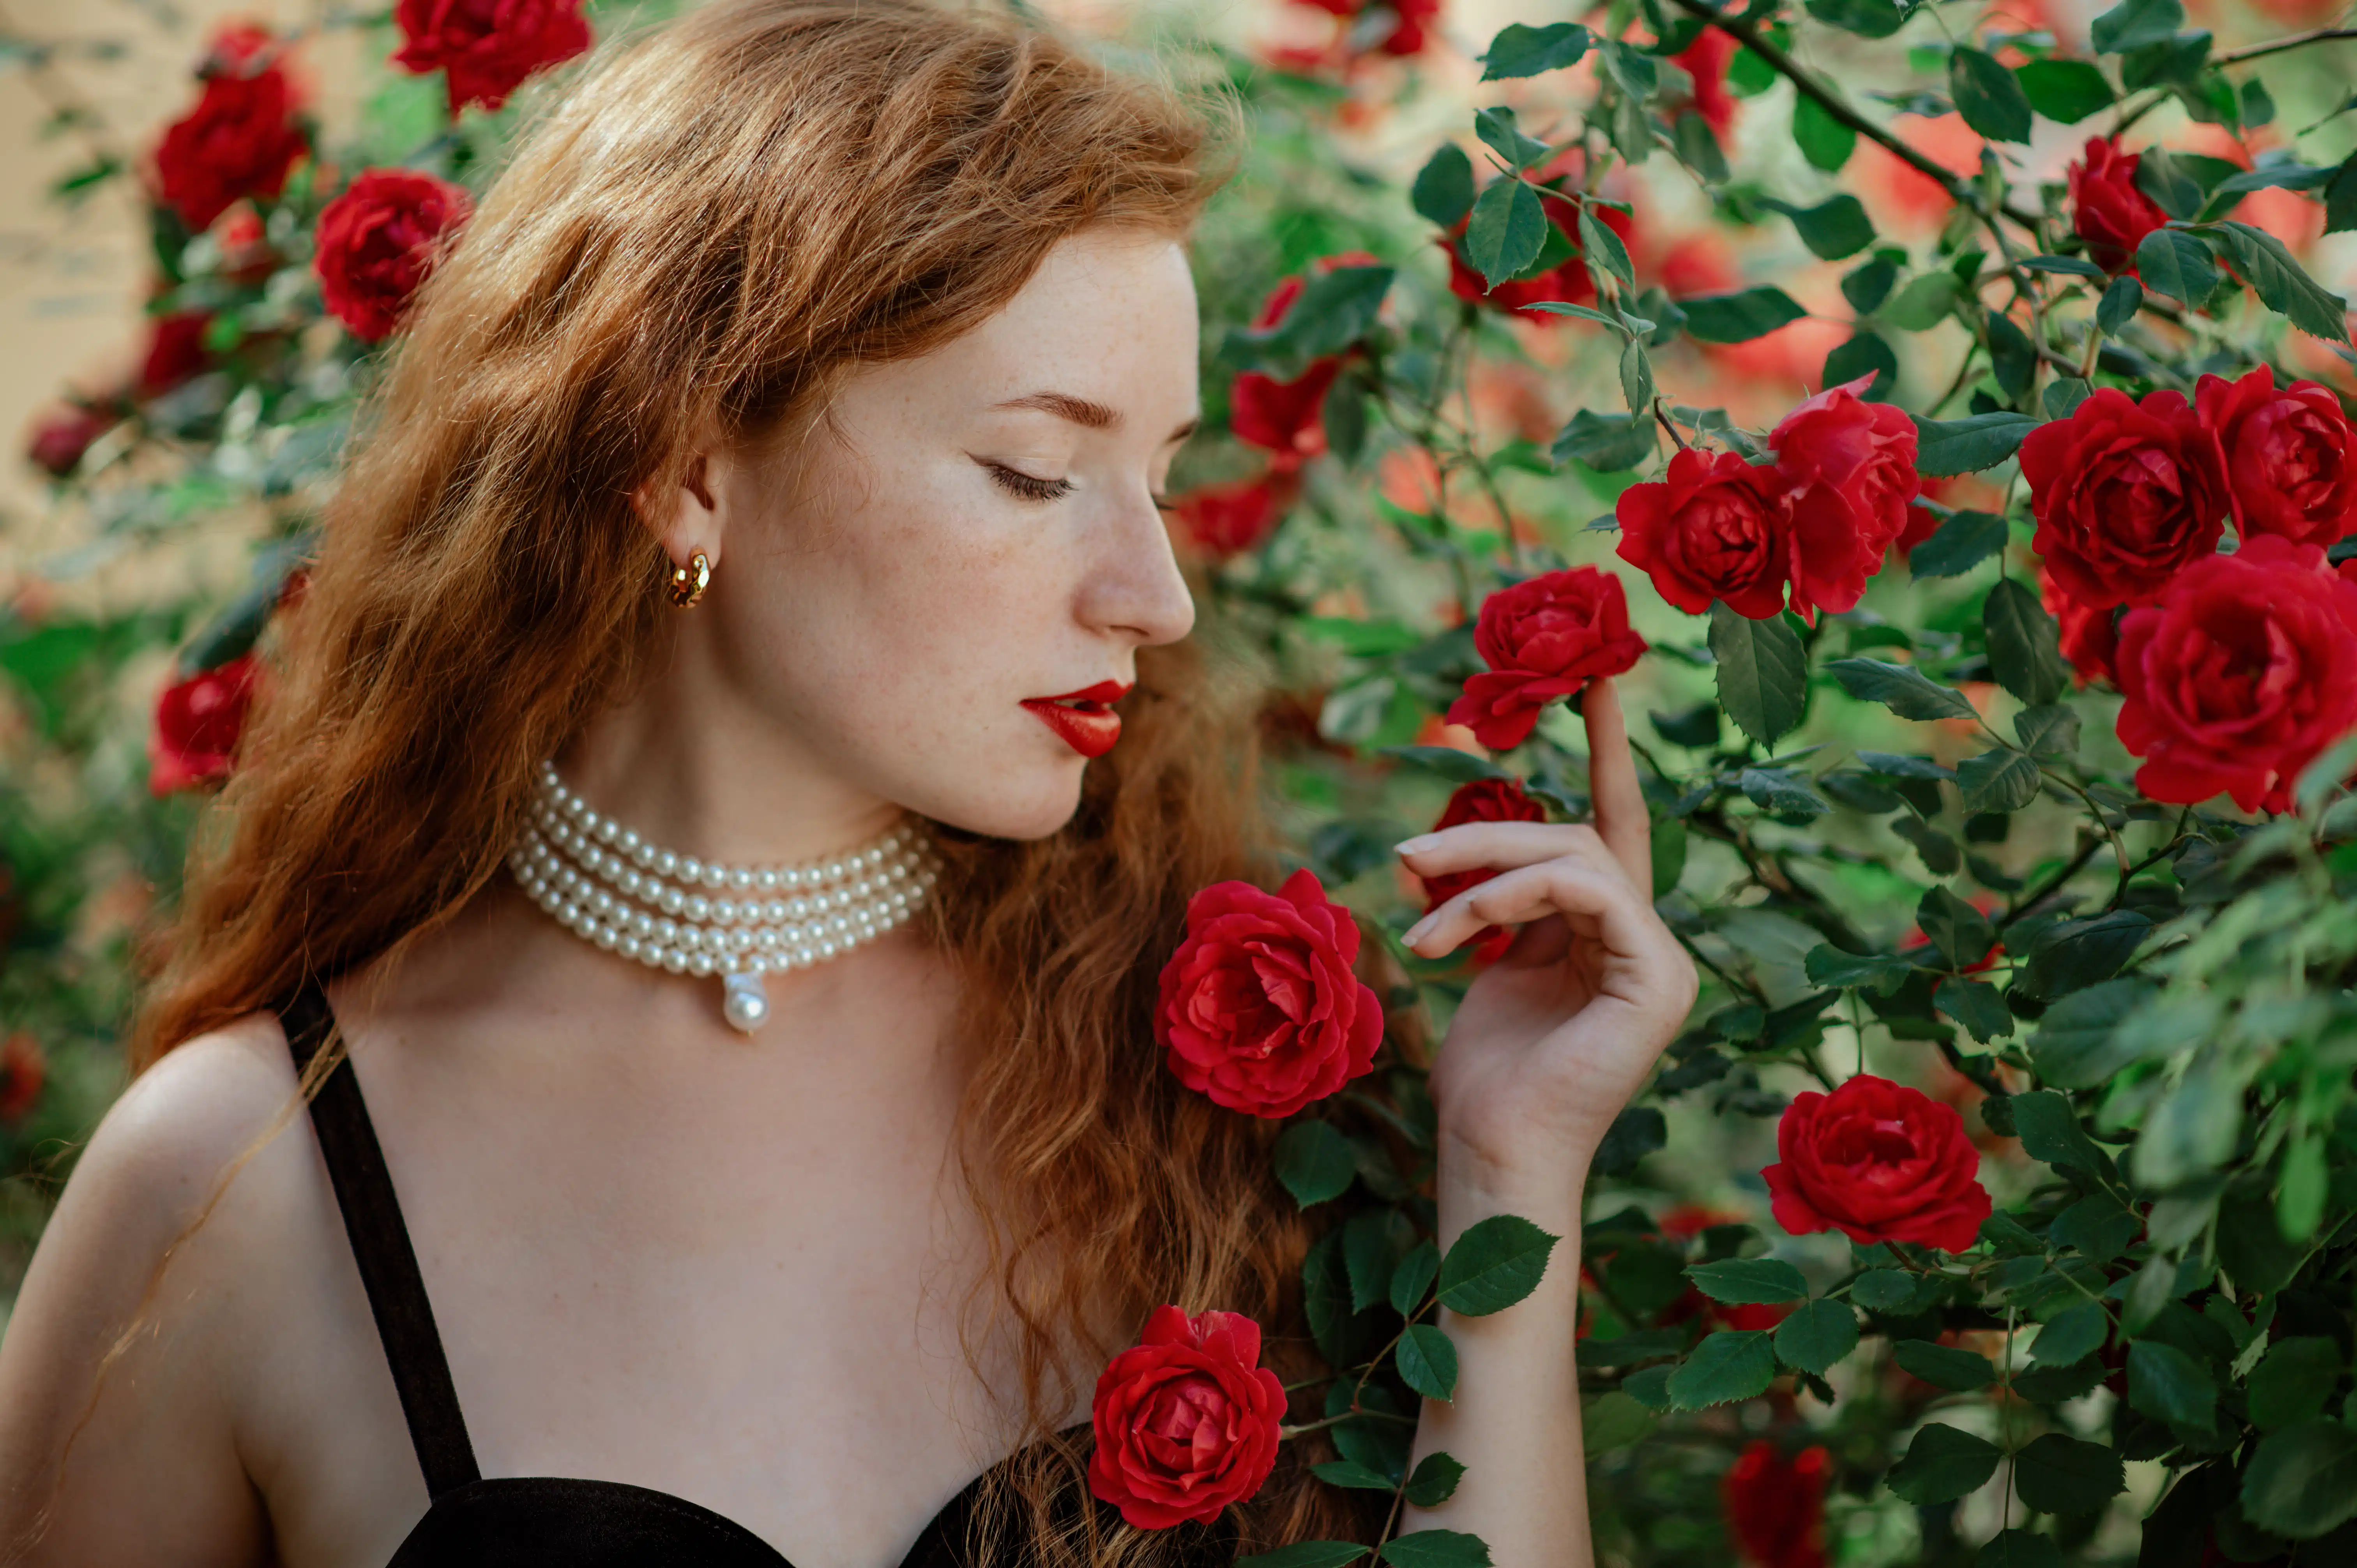 Beautiful redhead wearing elegant pearl necklace enjoying the roses in the garden